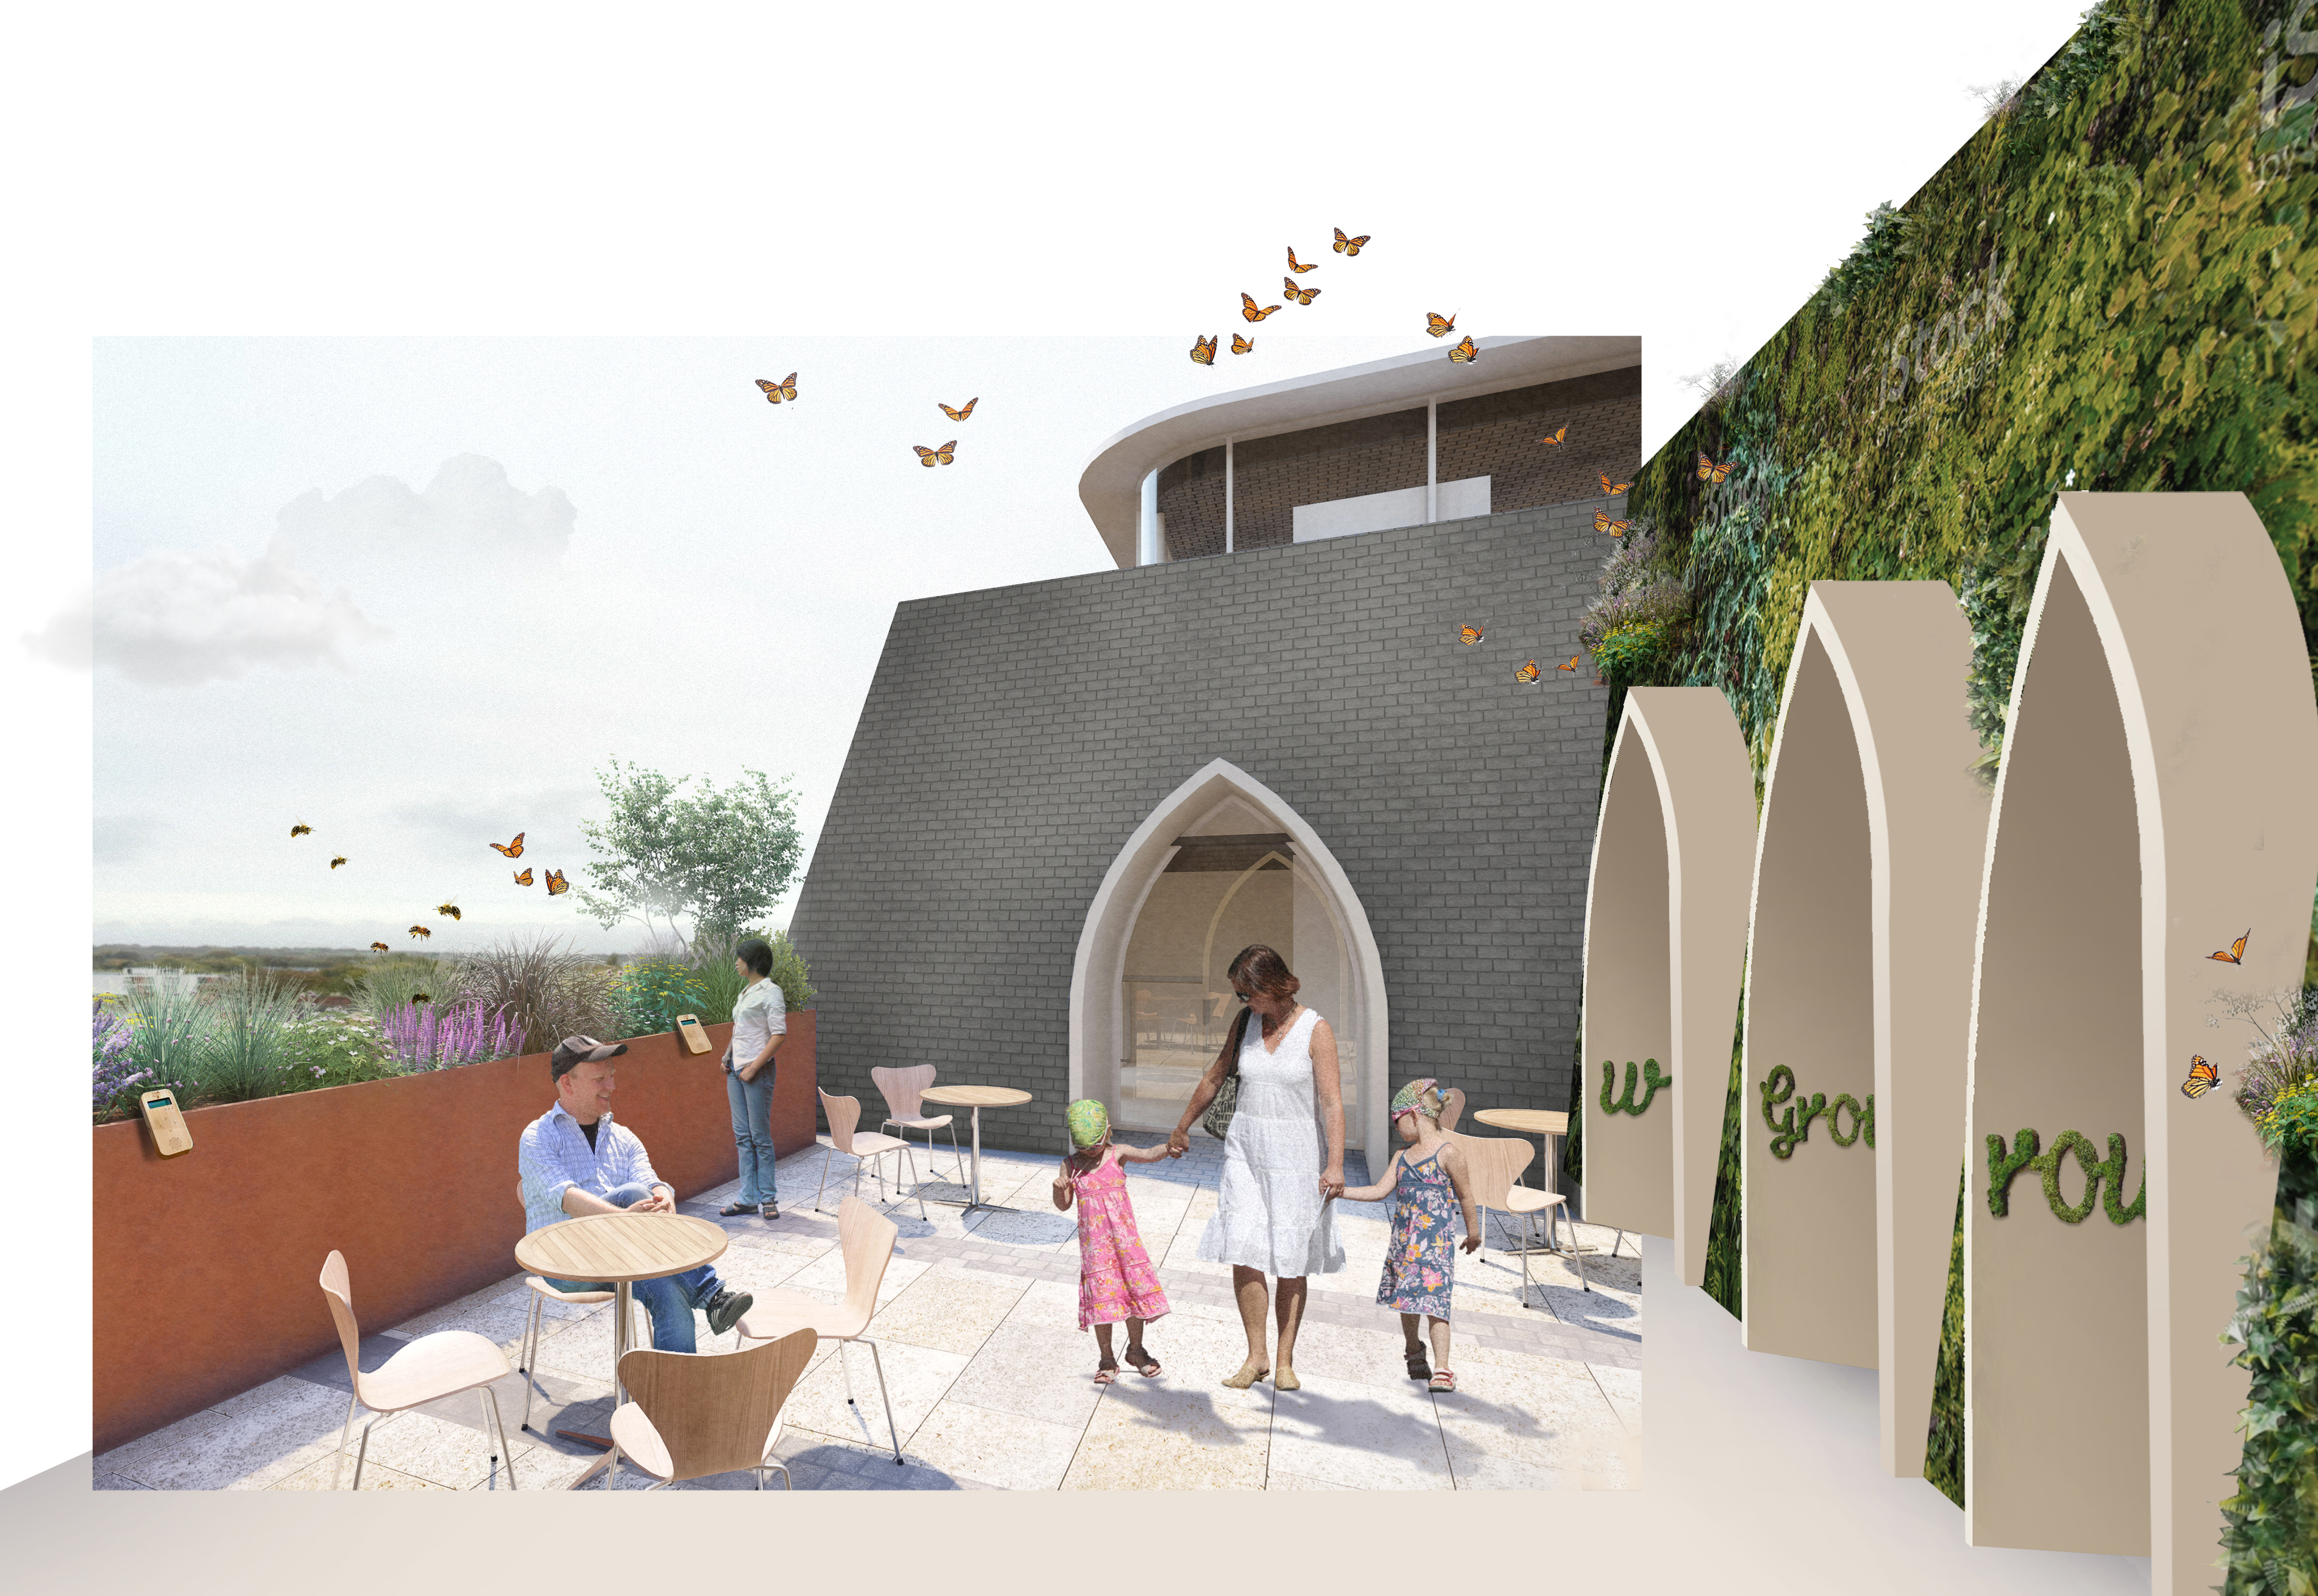 Concept drawing of Hereford's redeveloped museum's lower roof terrace